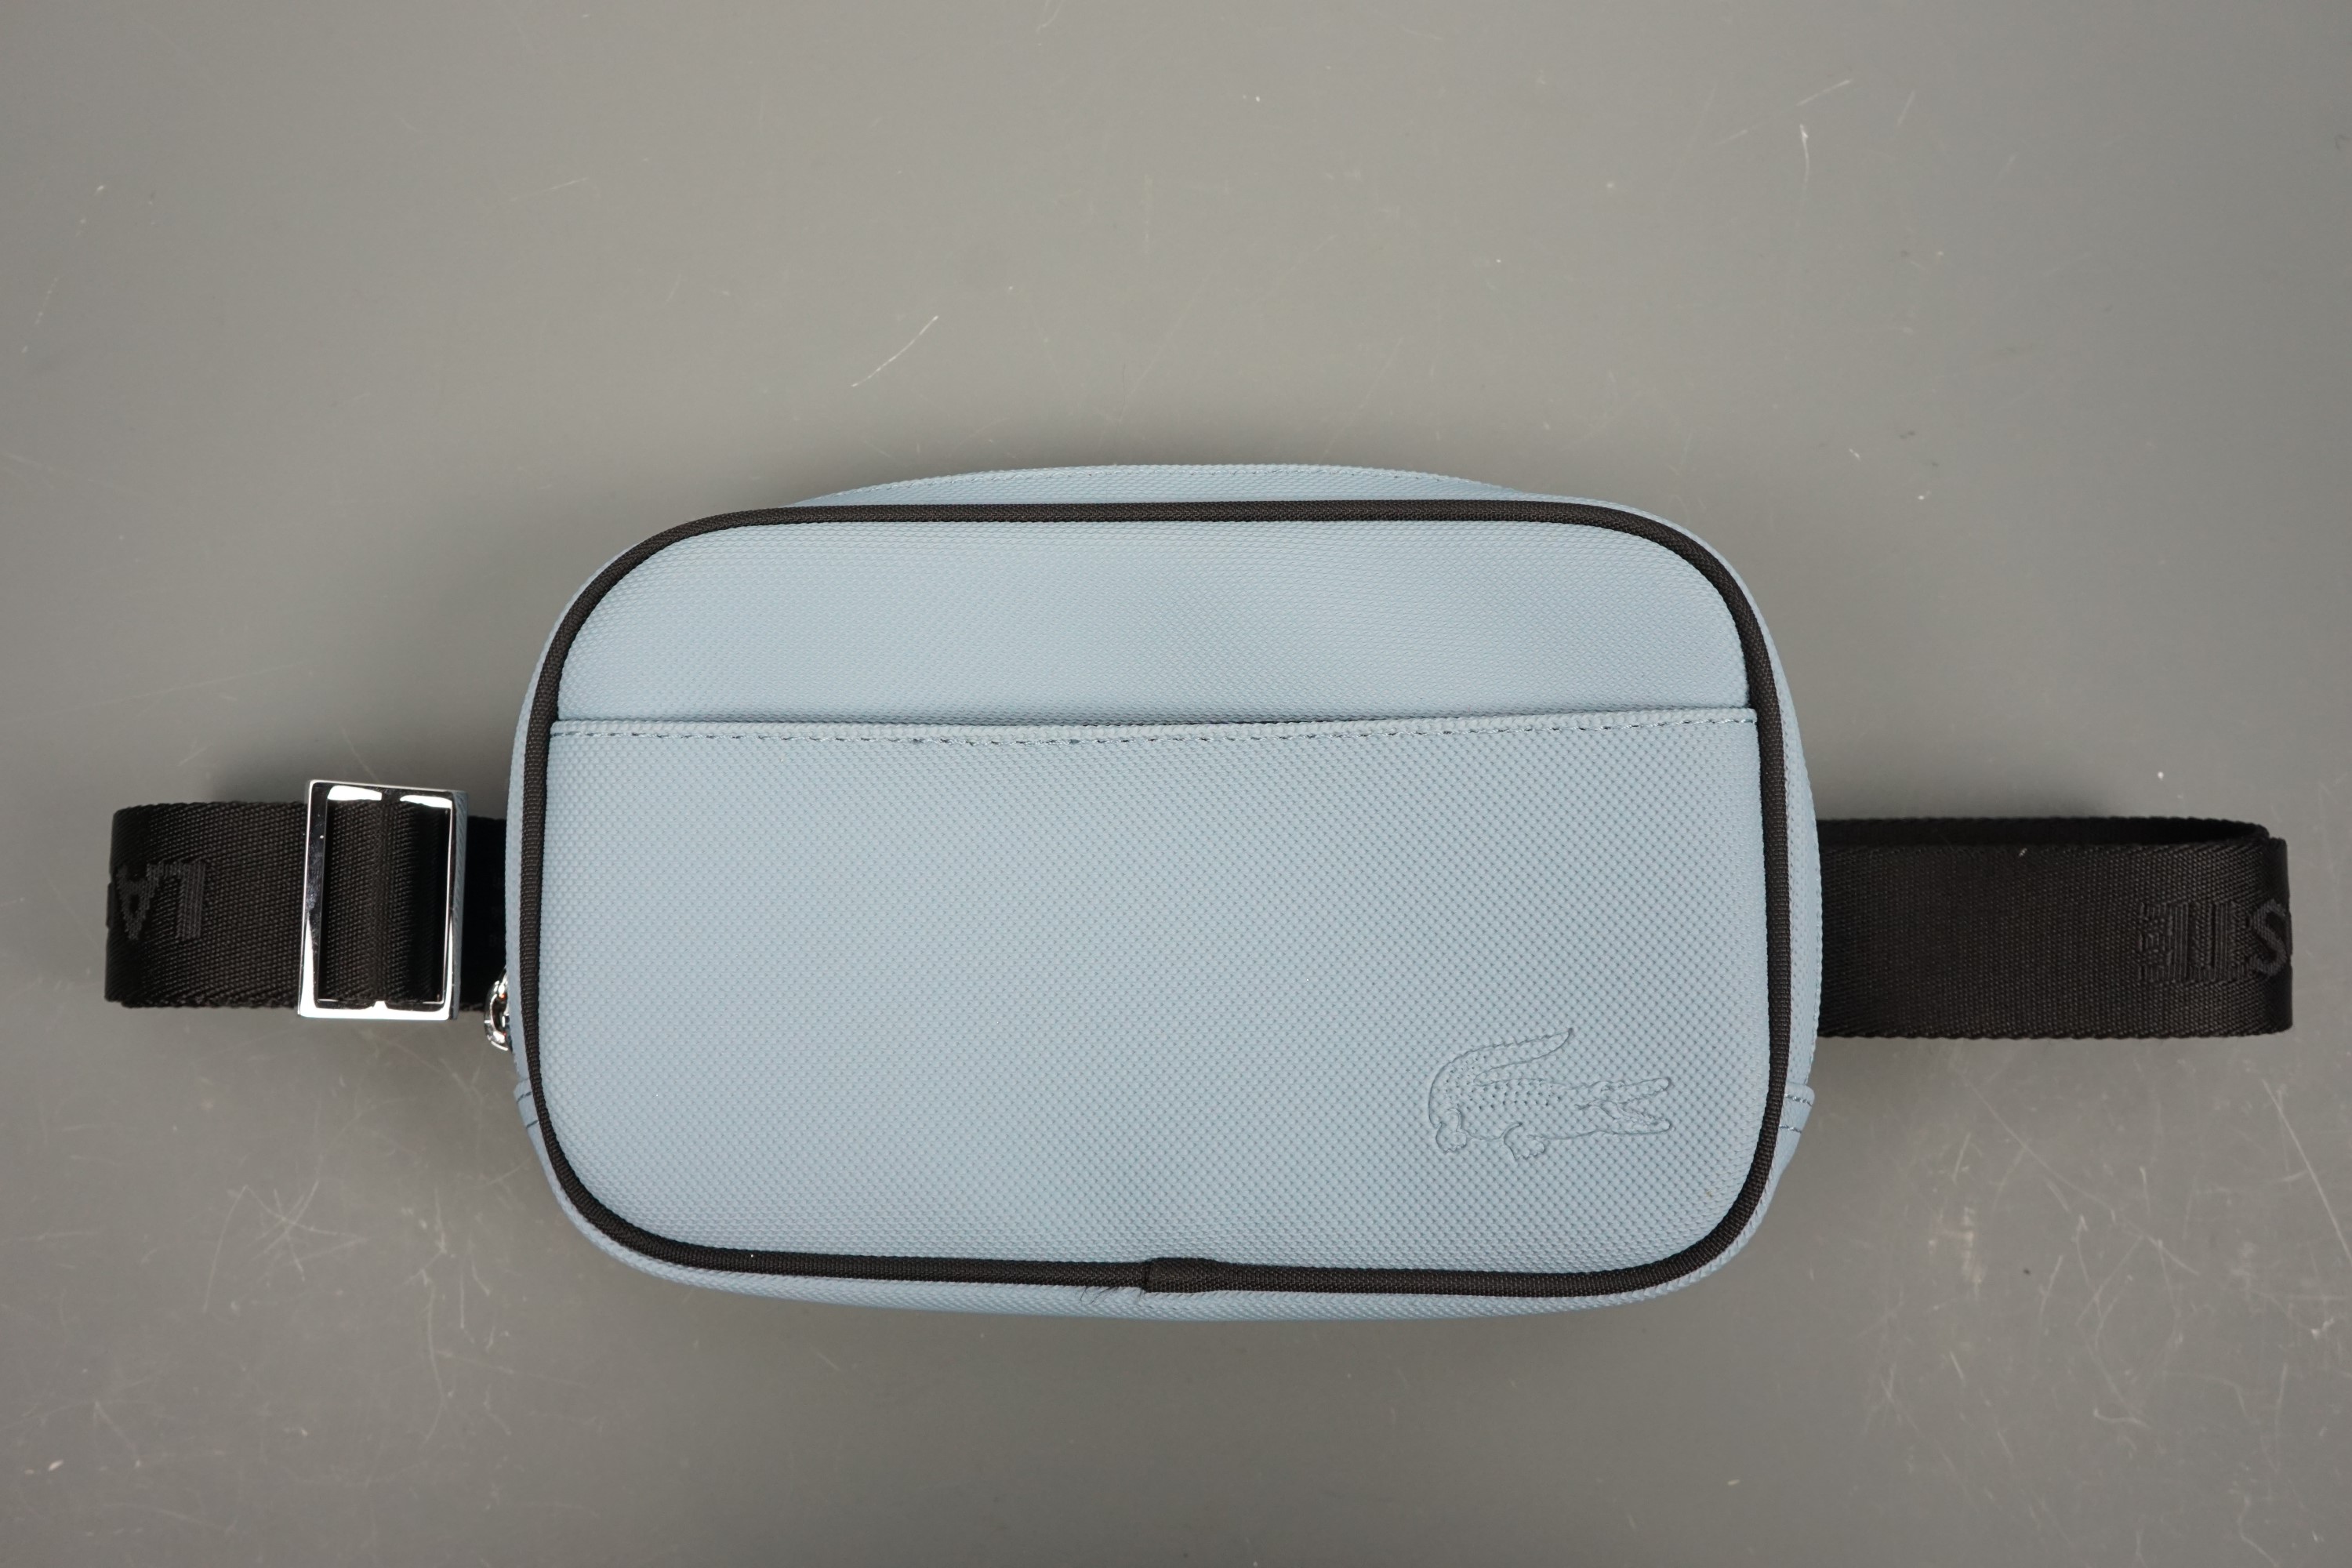 An "as new" unused Lacoste Classic II convertible clutch / hip / bum / waist / shoulder bag in - Image 2 of 2